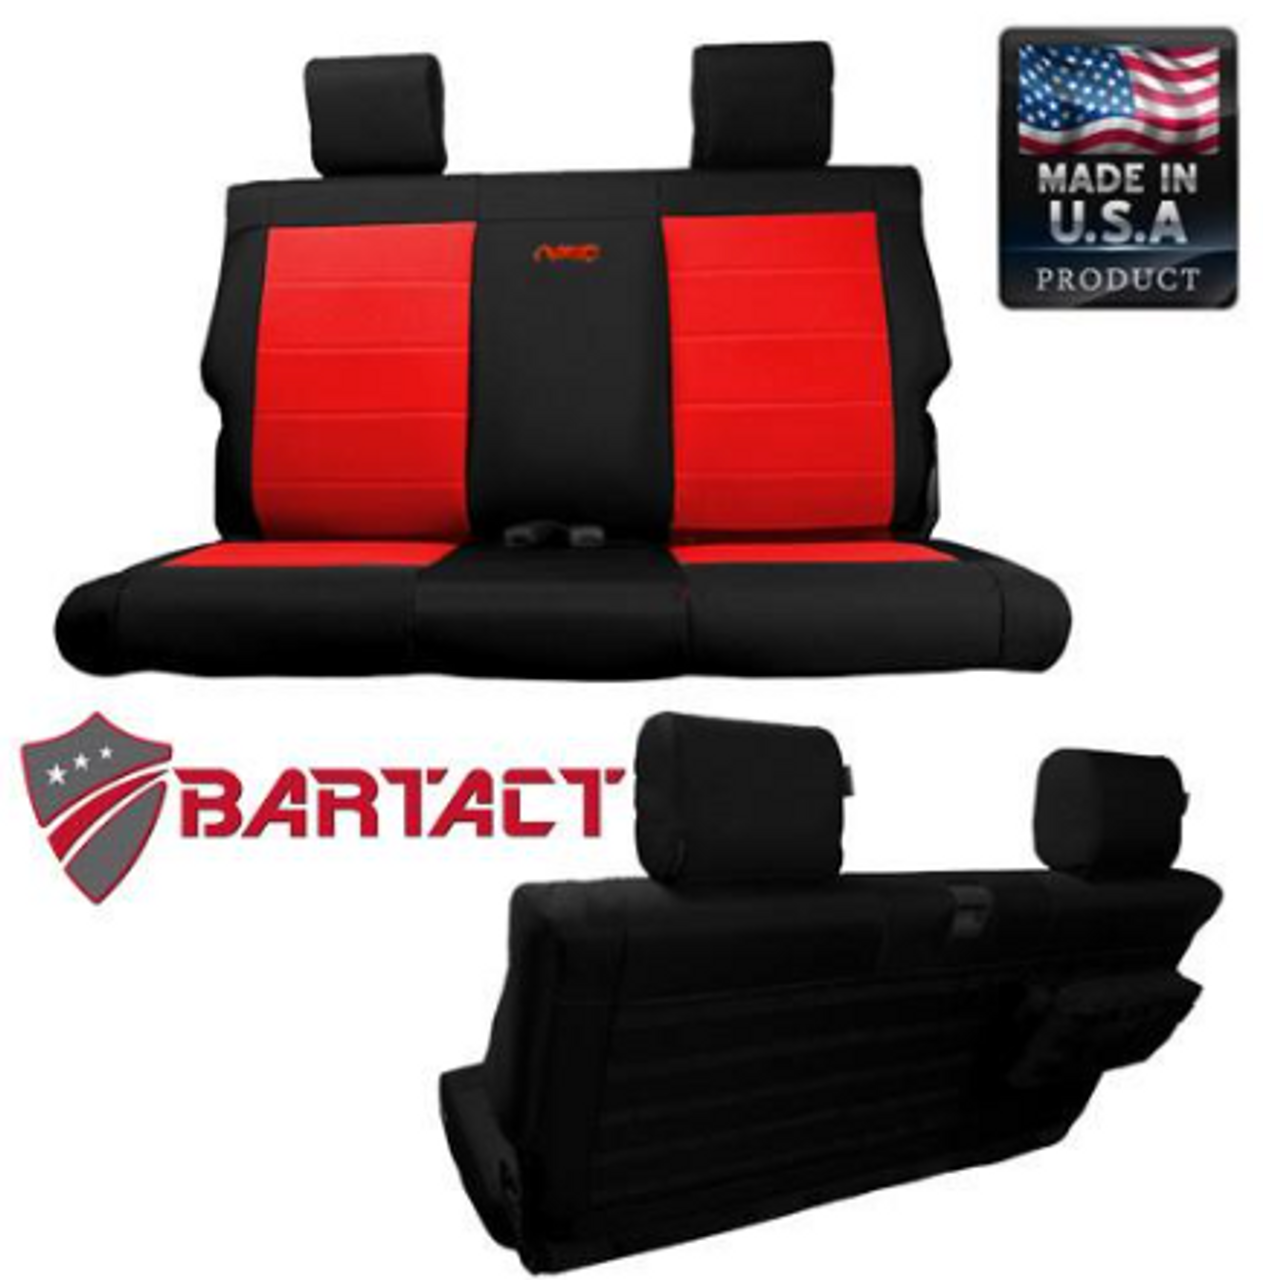 Bartact Tactical Rear Bench Seat Cover for Jeep Wrangler JL 2 Door 2018+